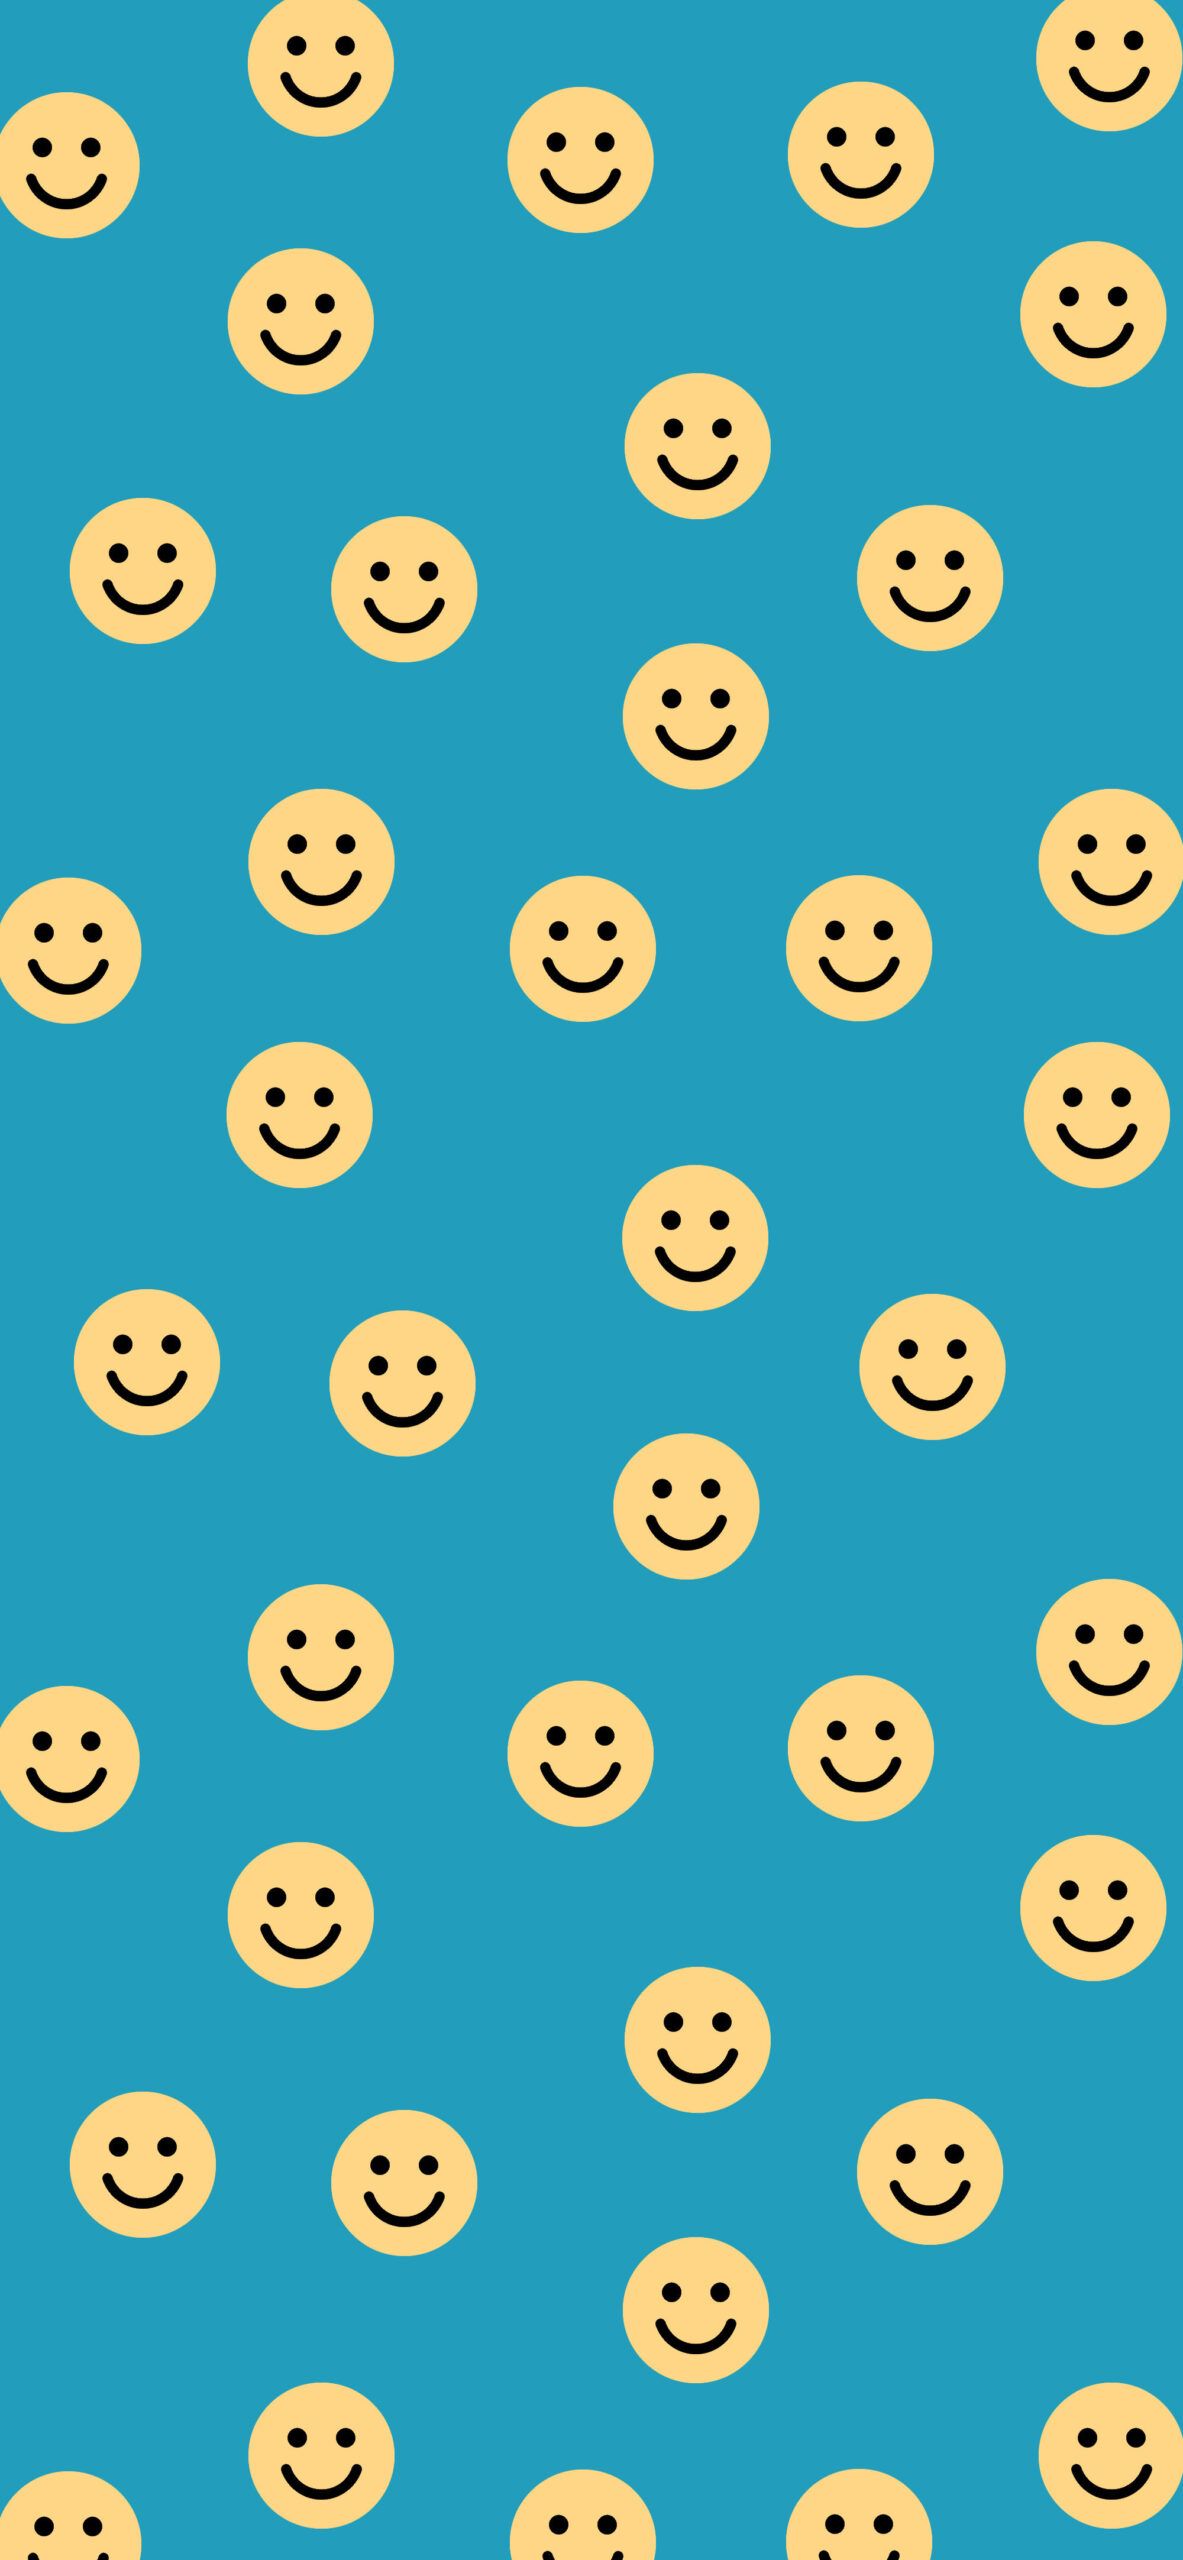 Simple Smiley Face Blue Wallpaper Smiley Face Wallpaper iPhone